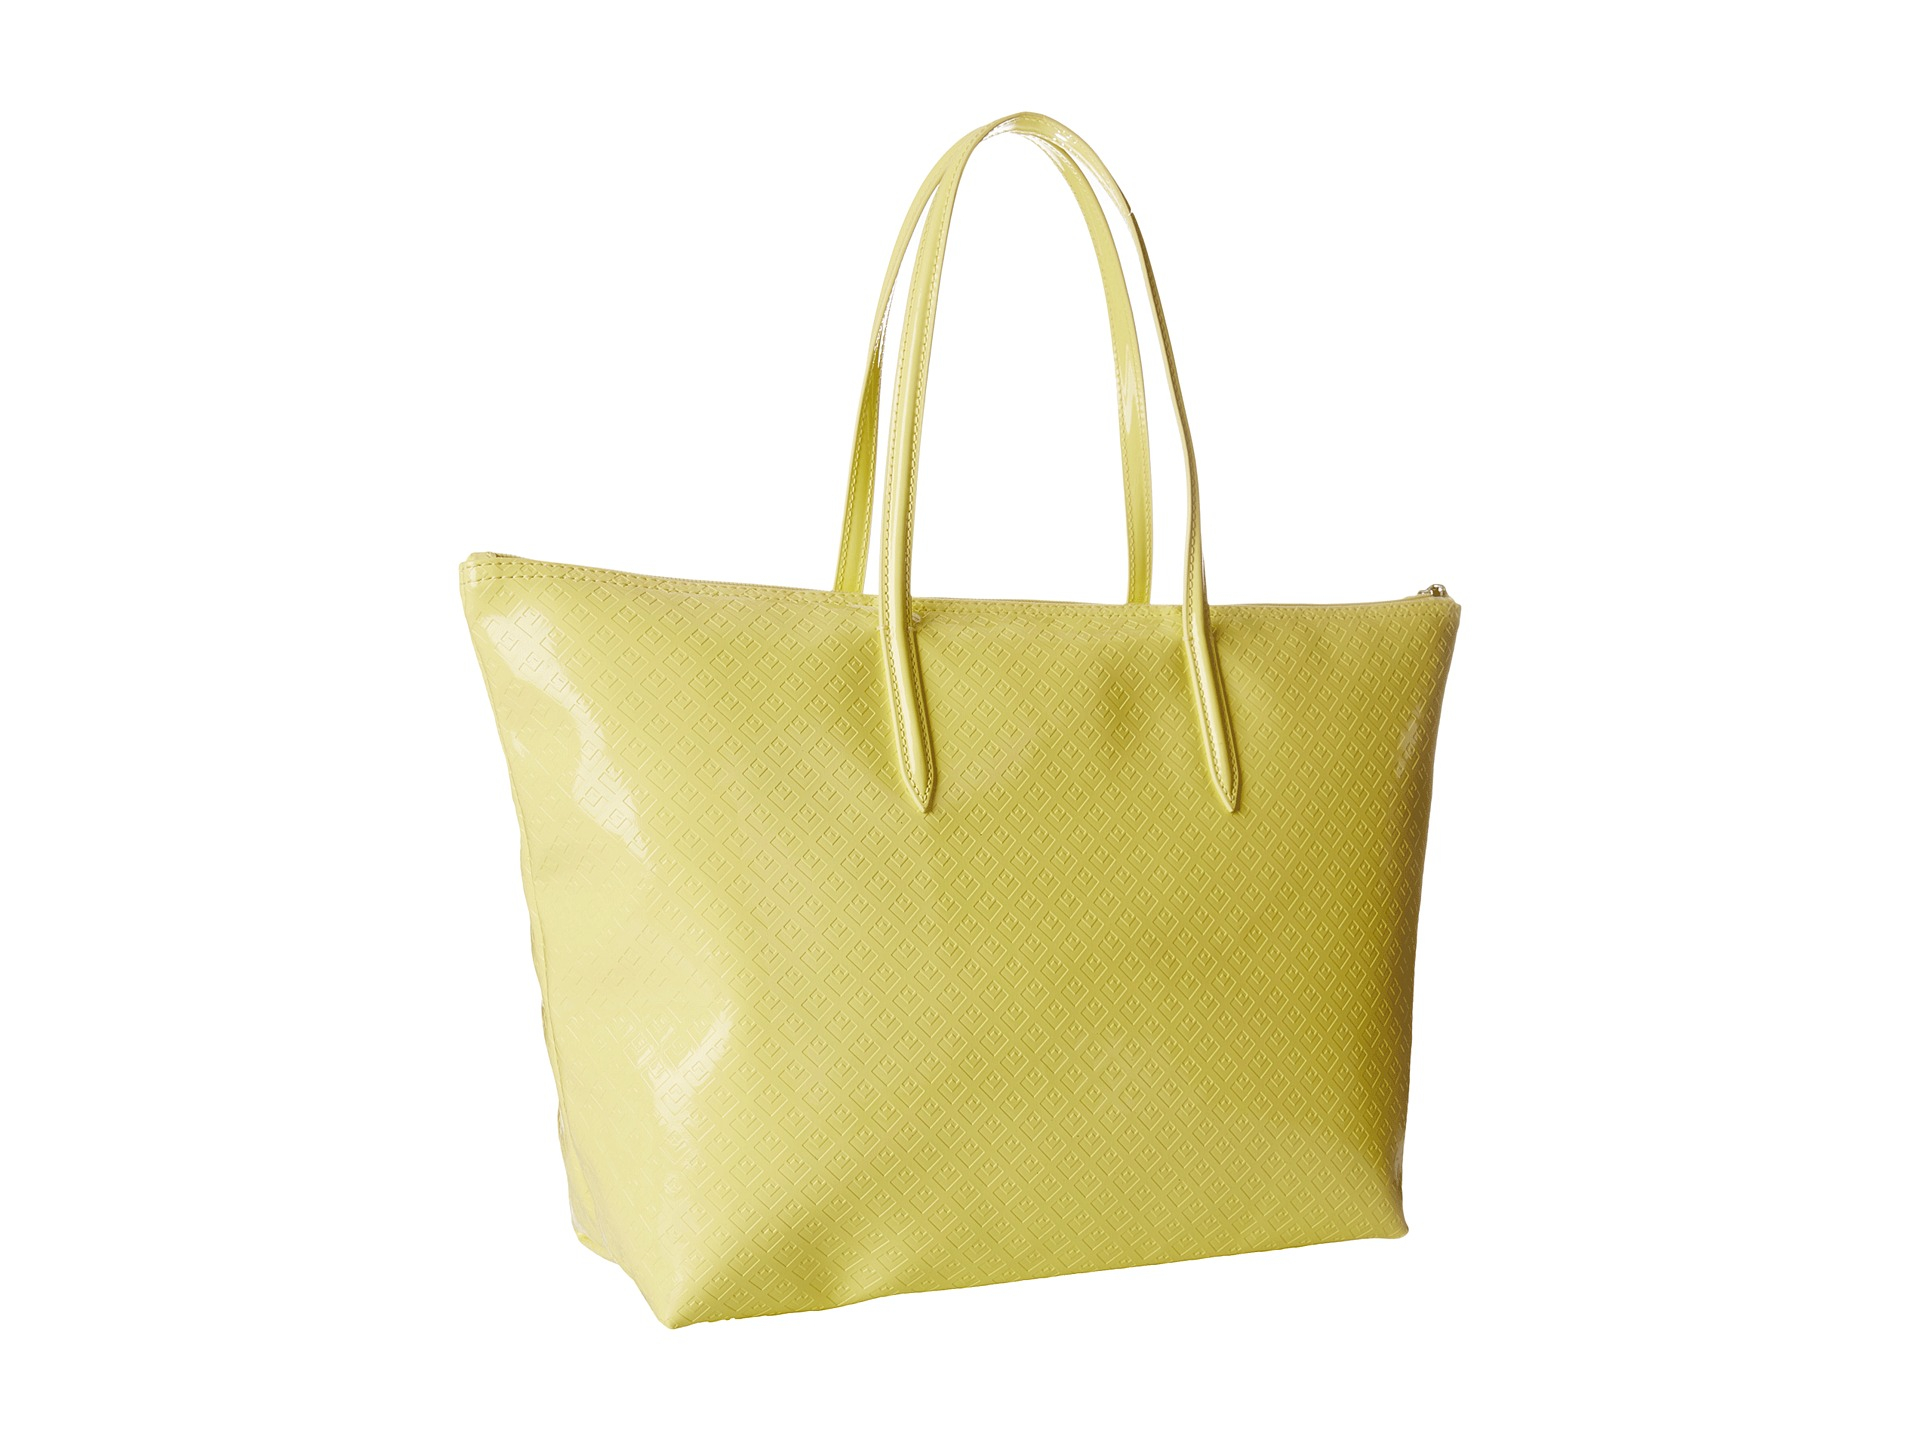 Lyst - Lacoste L.12.12 Glossy Large Shopping Bag in Yellow